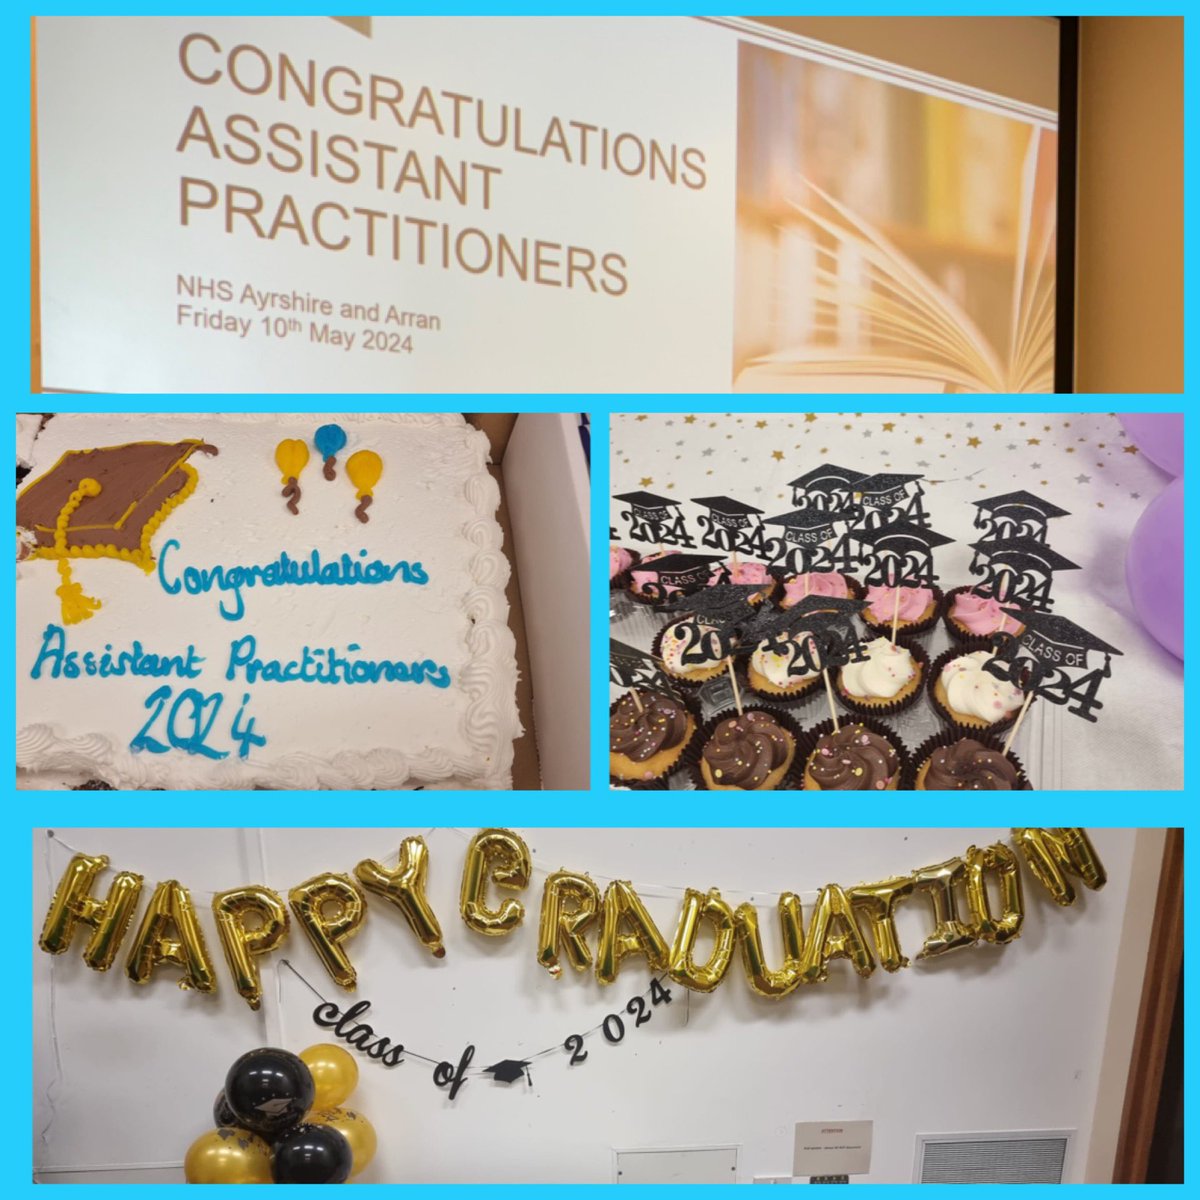 What a wonderful morning celebrating our 1st Cohort of Assistant Practitioners in Acute Services. Well done to all and thank you to everyone who has supported their journey.